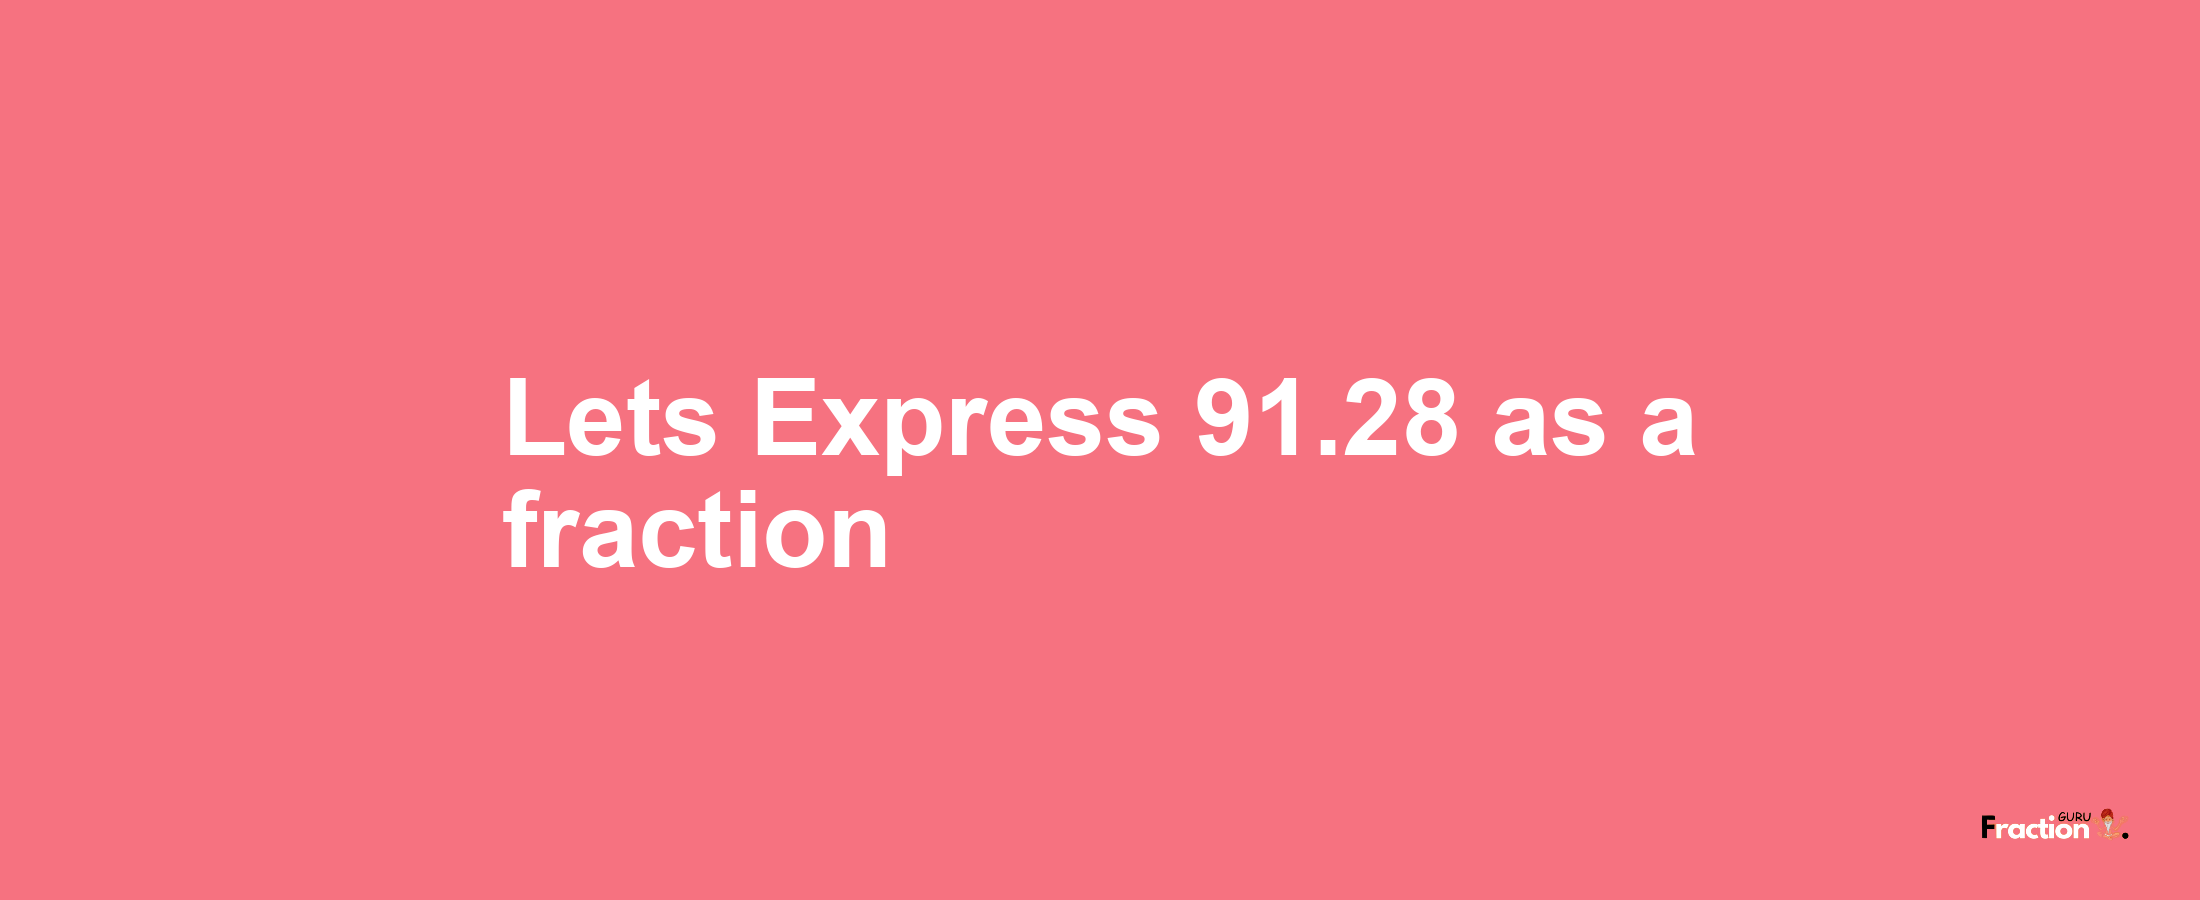 Lets Express 91.28 as afraction